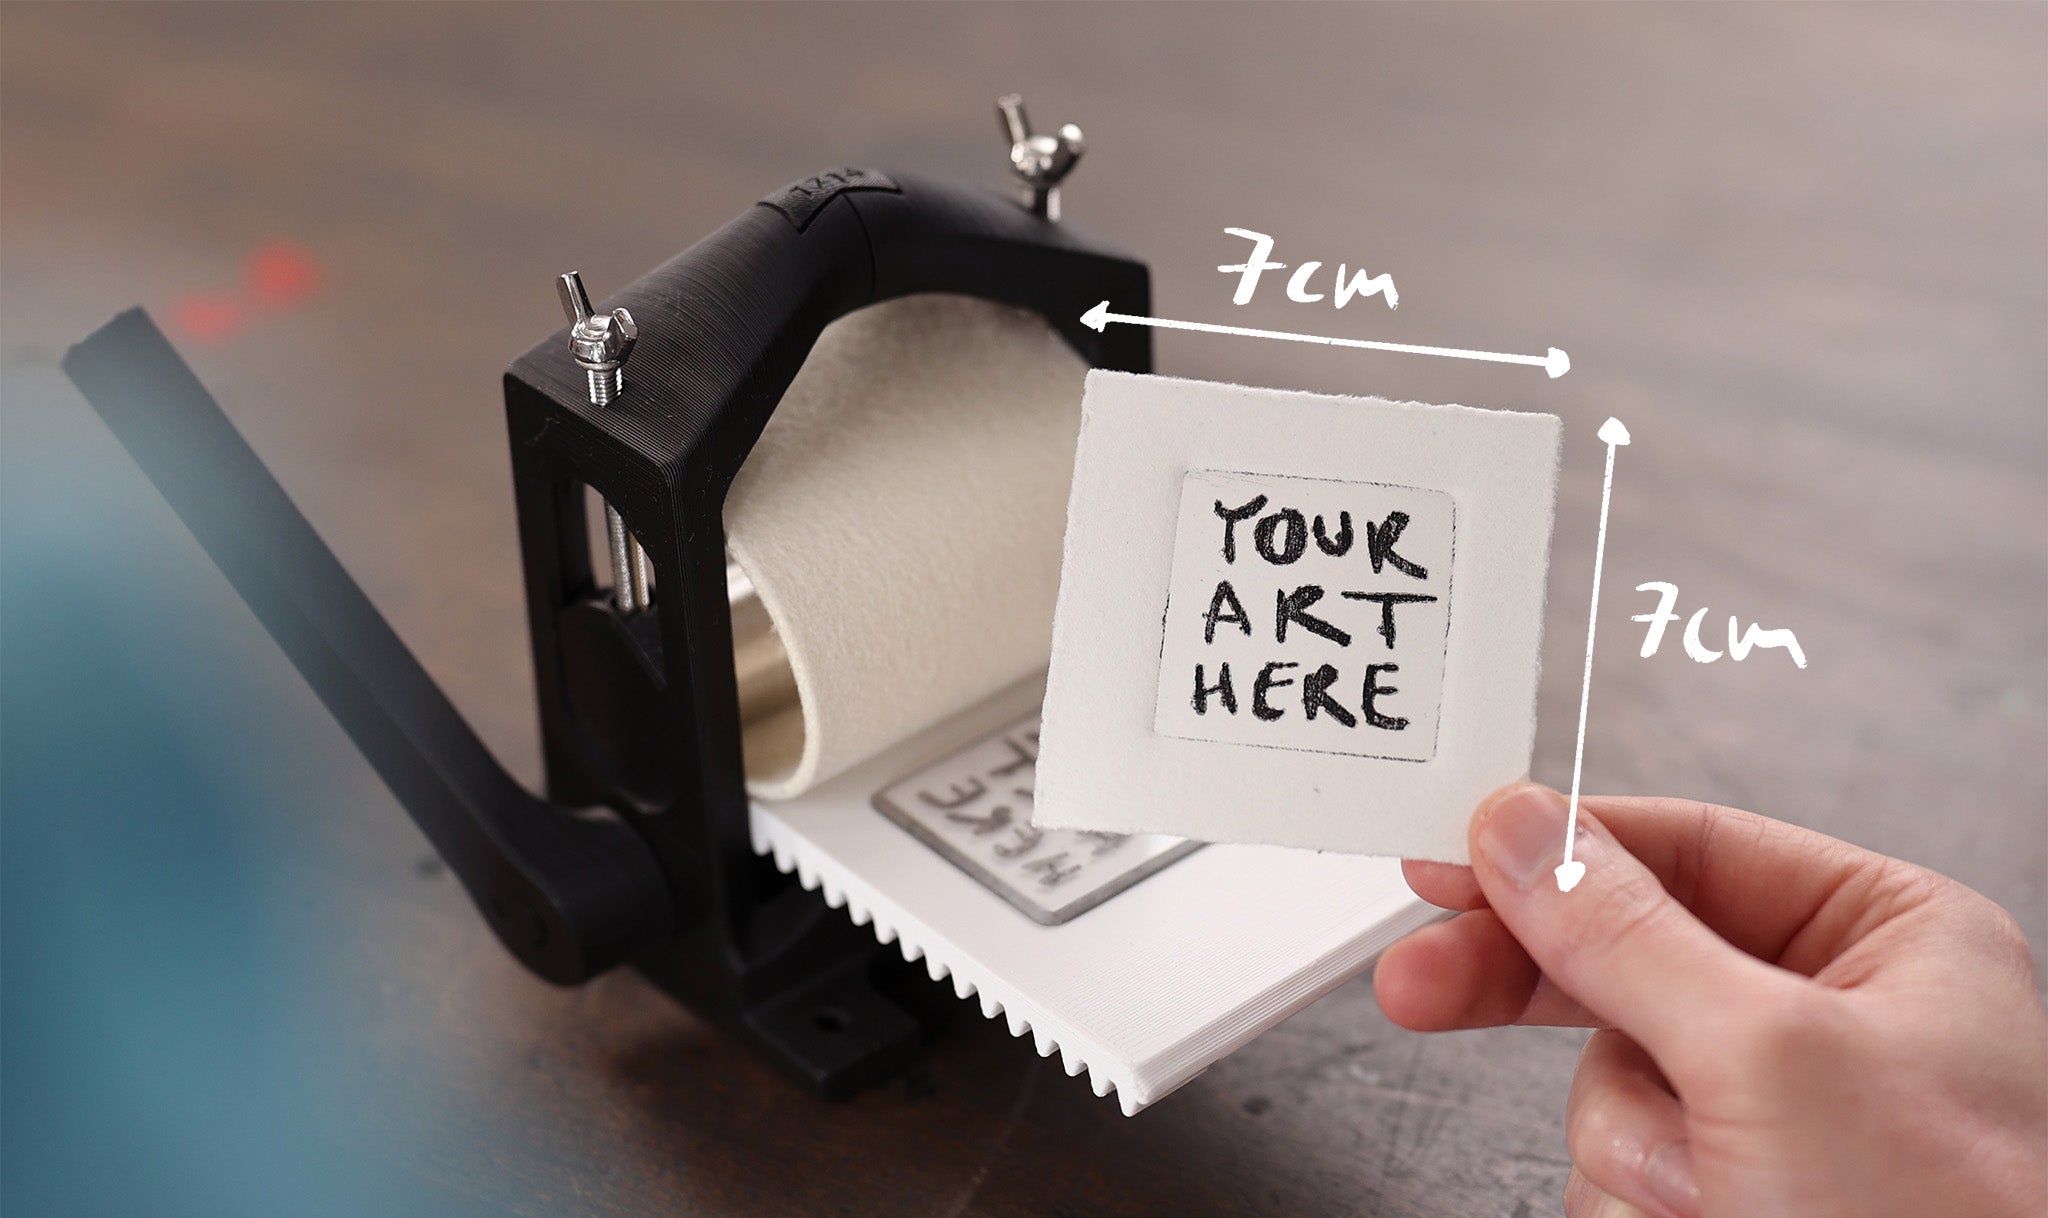 A hand is holding a small 7x7cm sized print into the camera. It shows the words "Your Art here" in black letters. A small black 3D printed printing press is placed in the background.